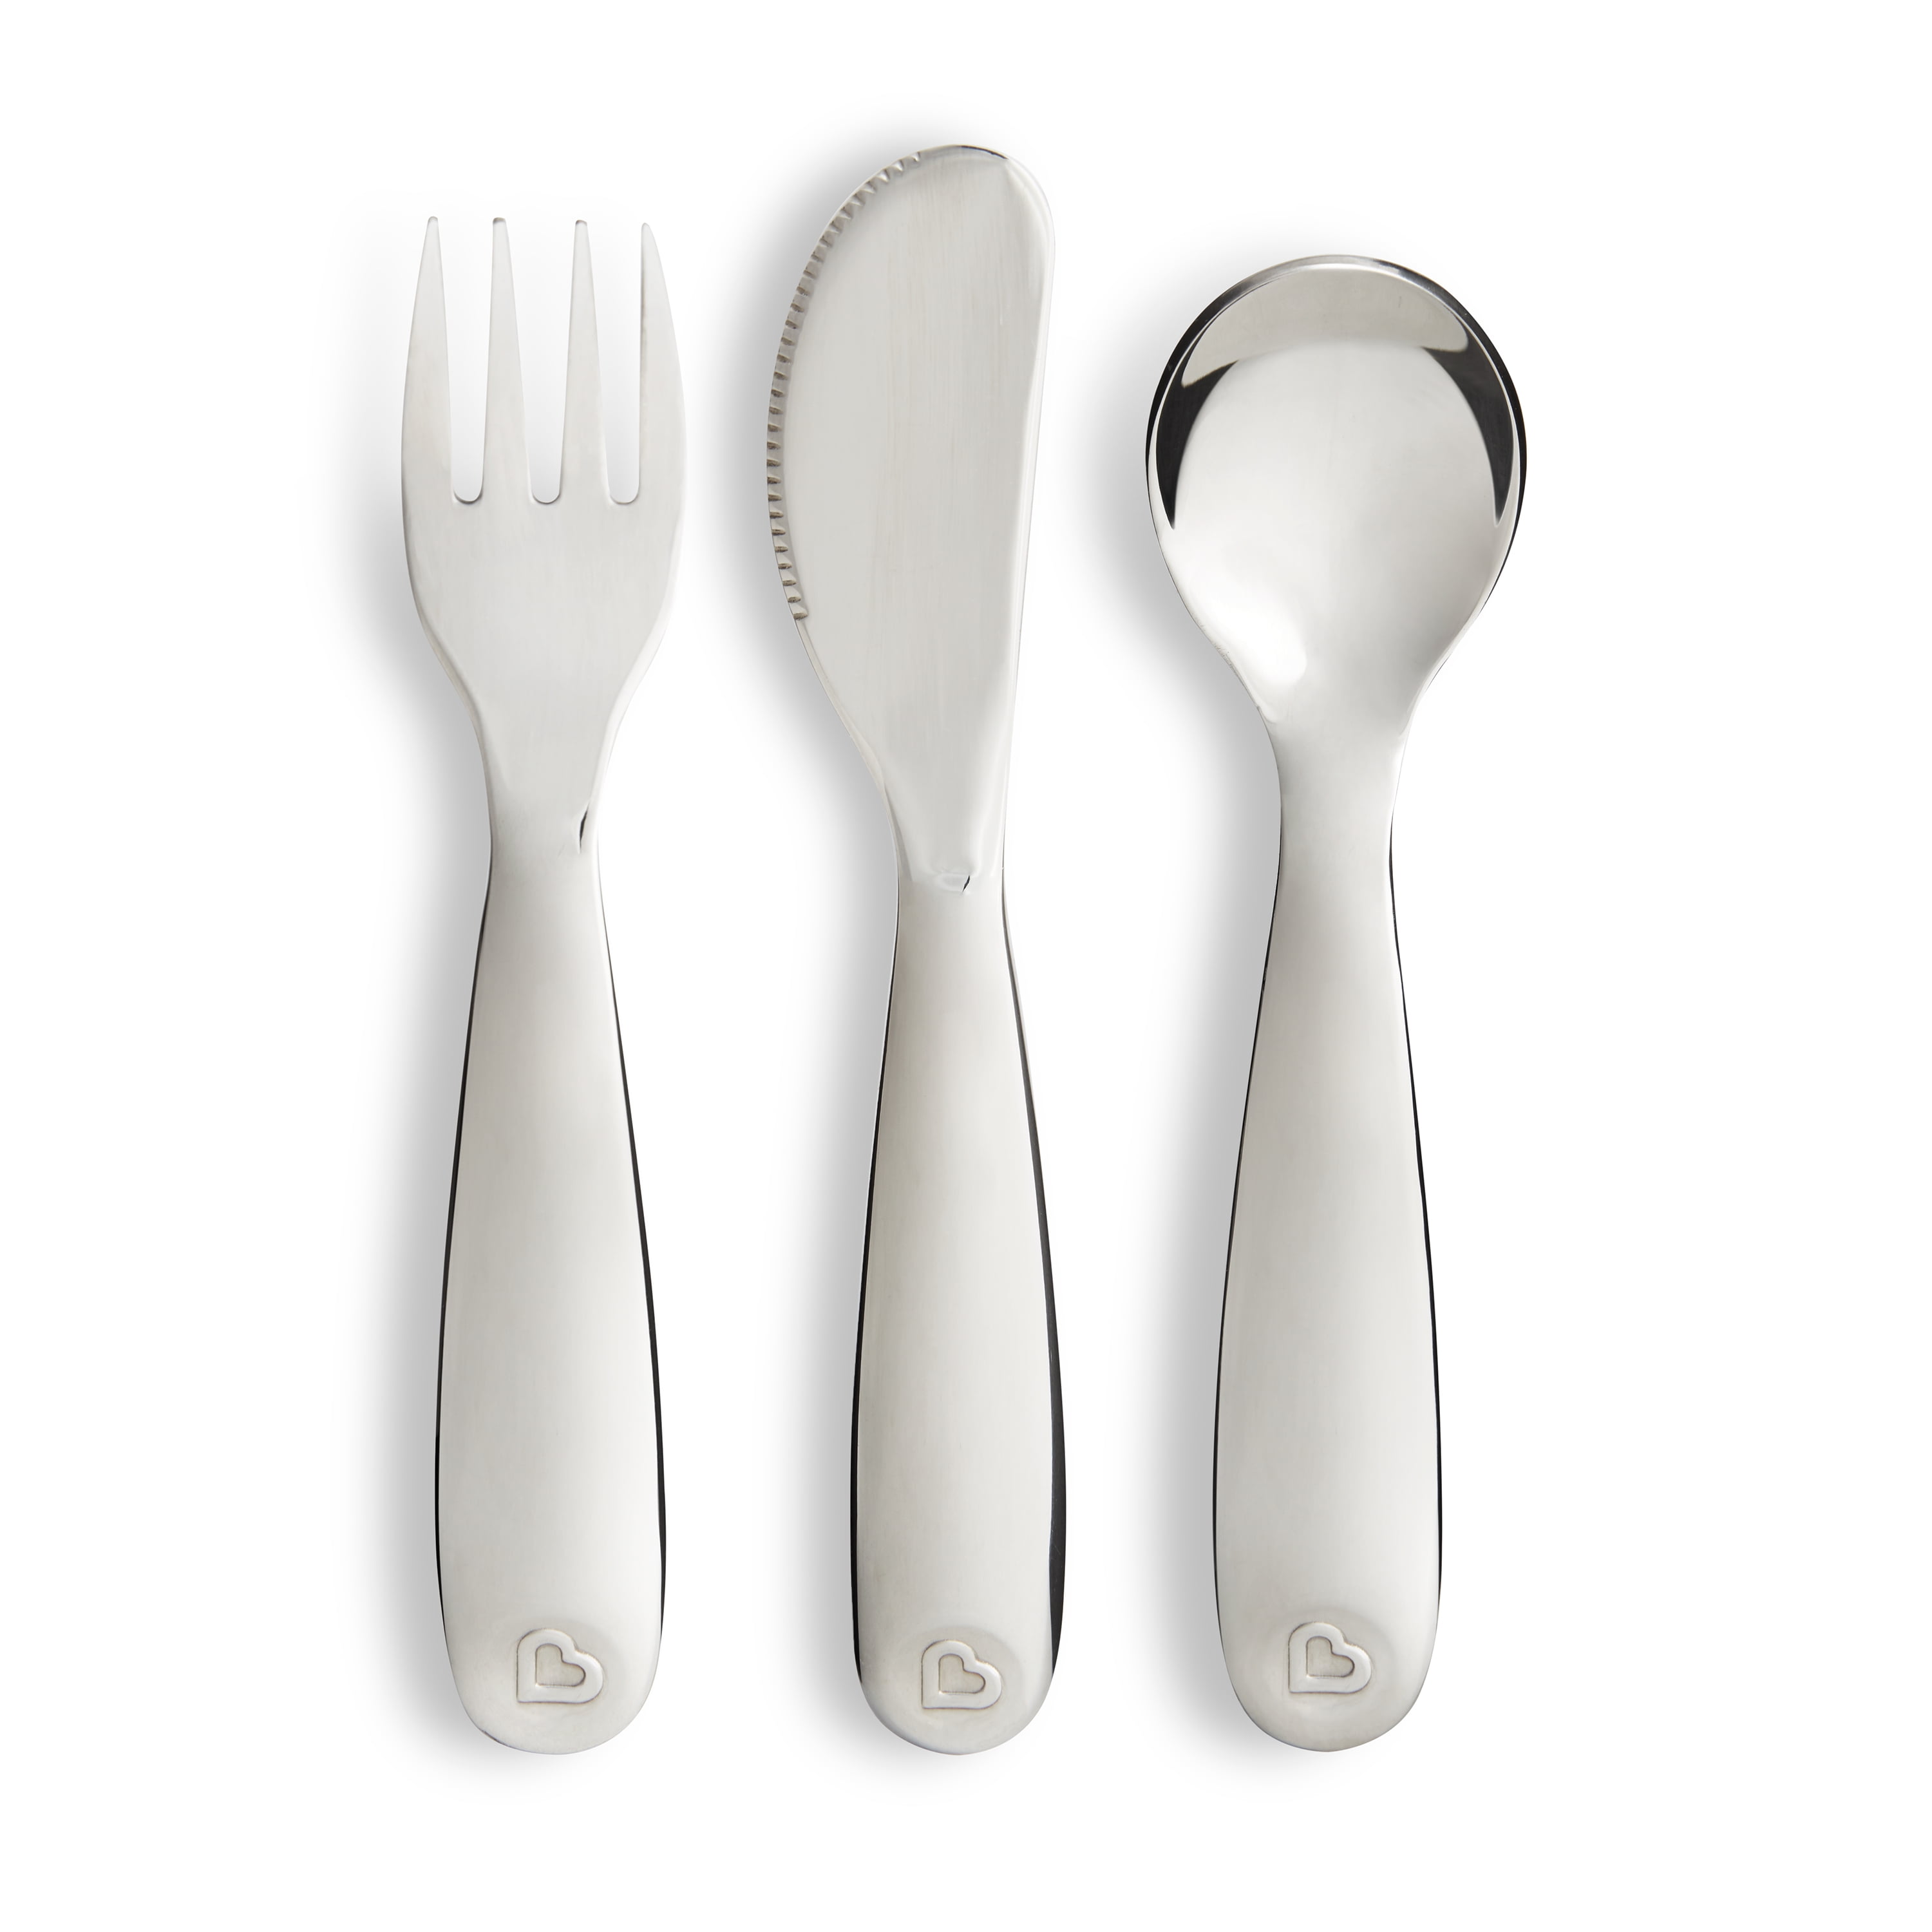 Try Kitchenware Coloring: The Fork Game - SplashLearn